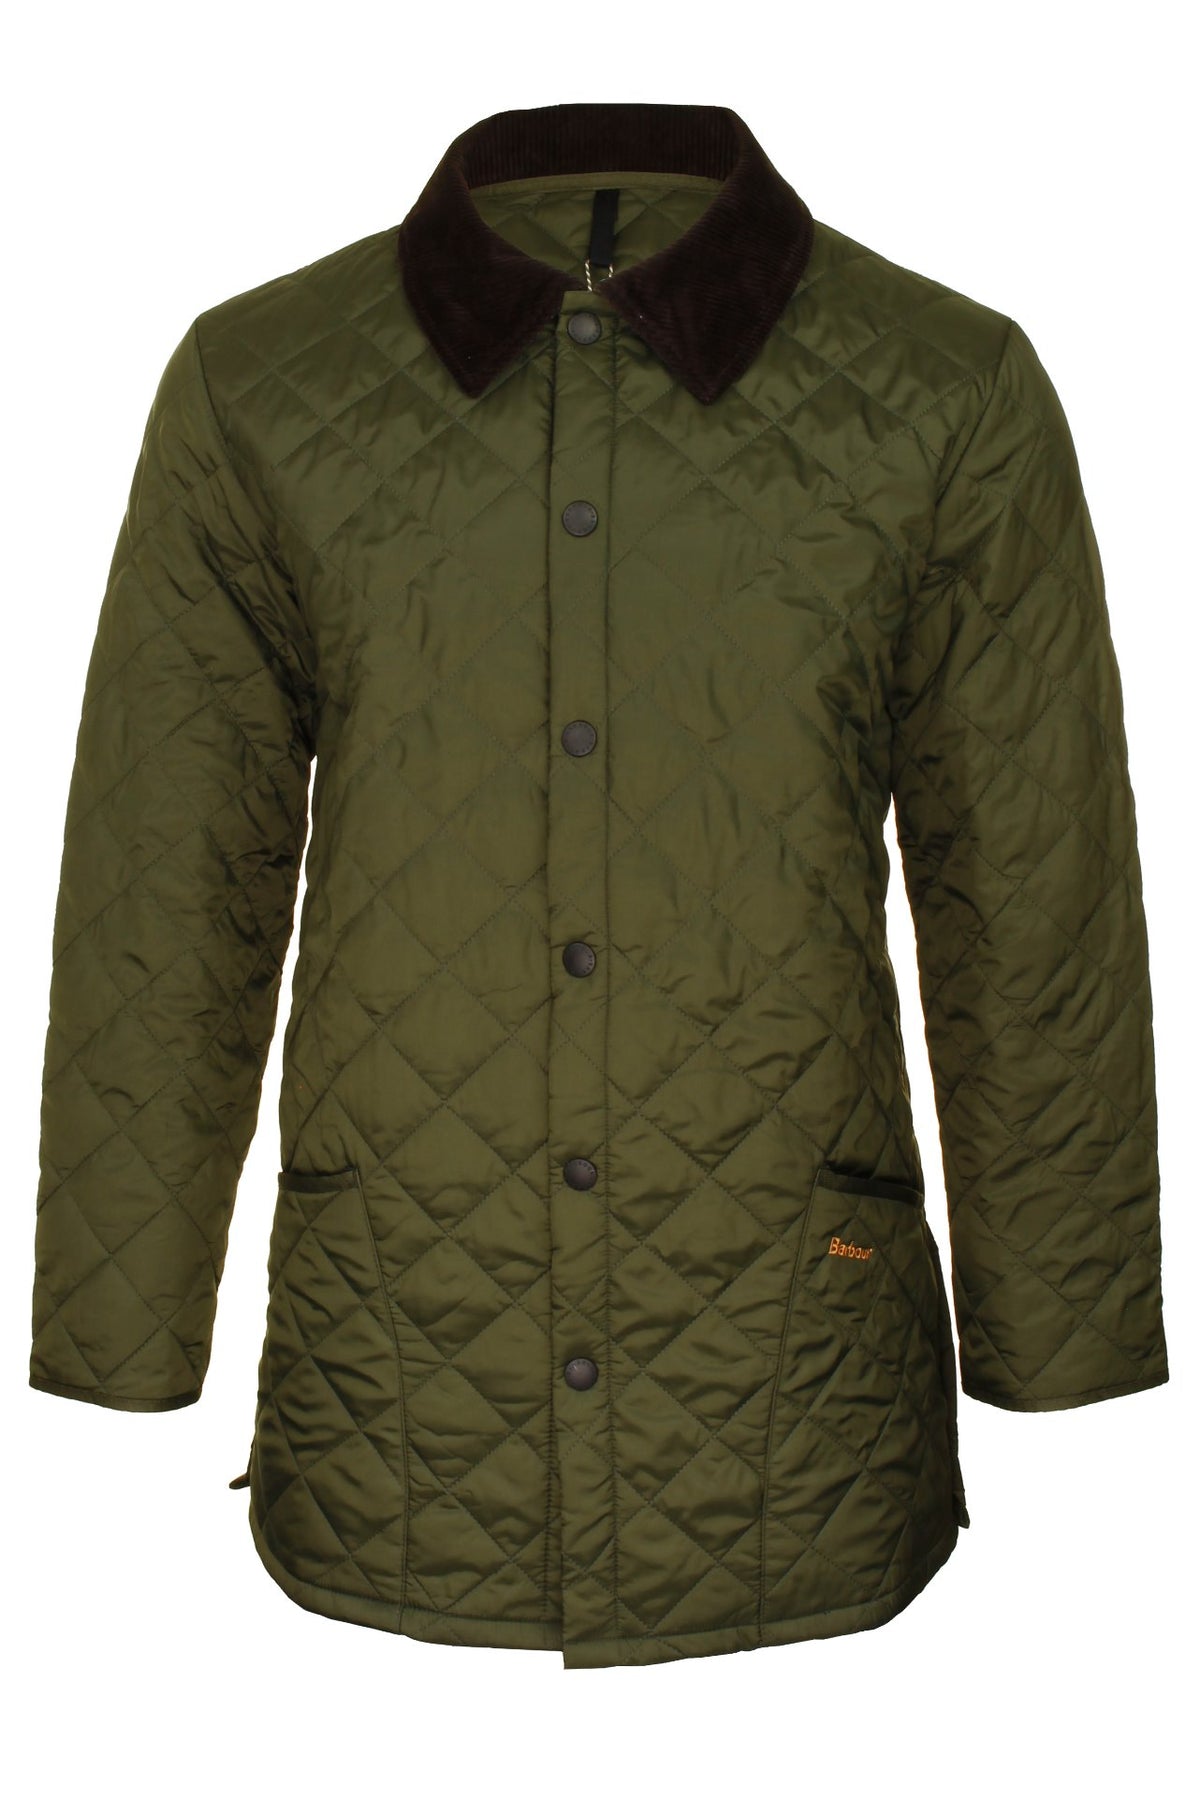 Barbour Men's Liddesdale Quilted Jacket, 01, Mqu0001